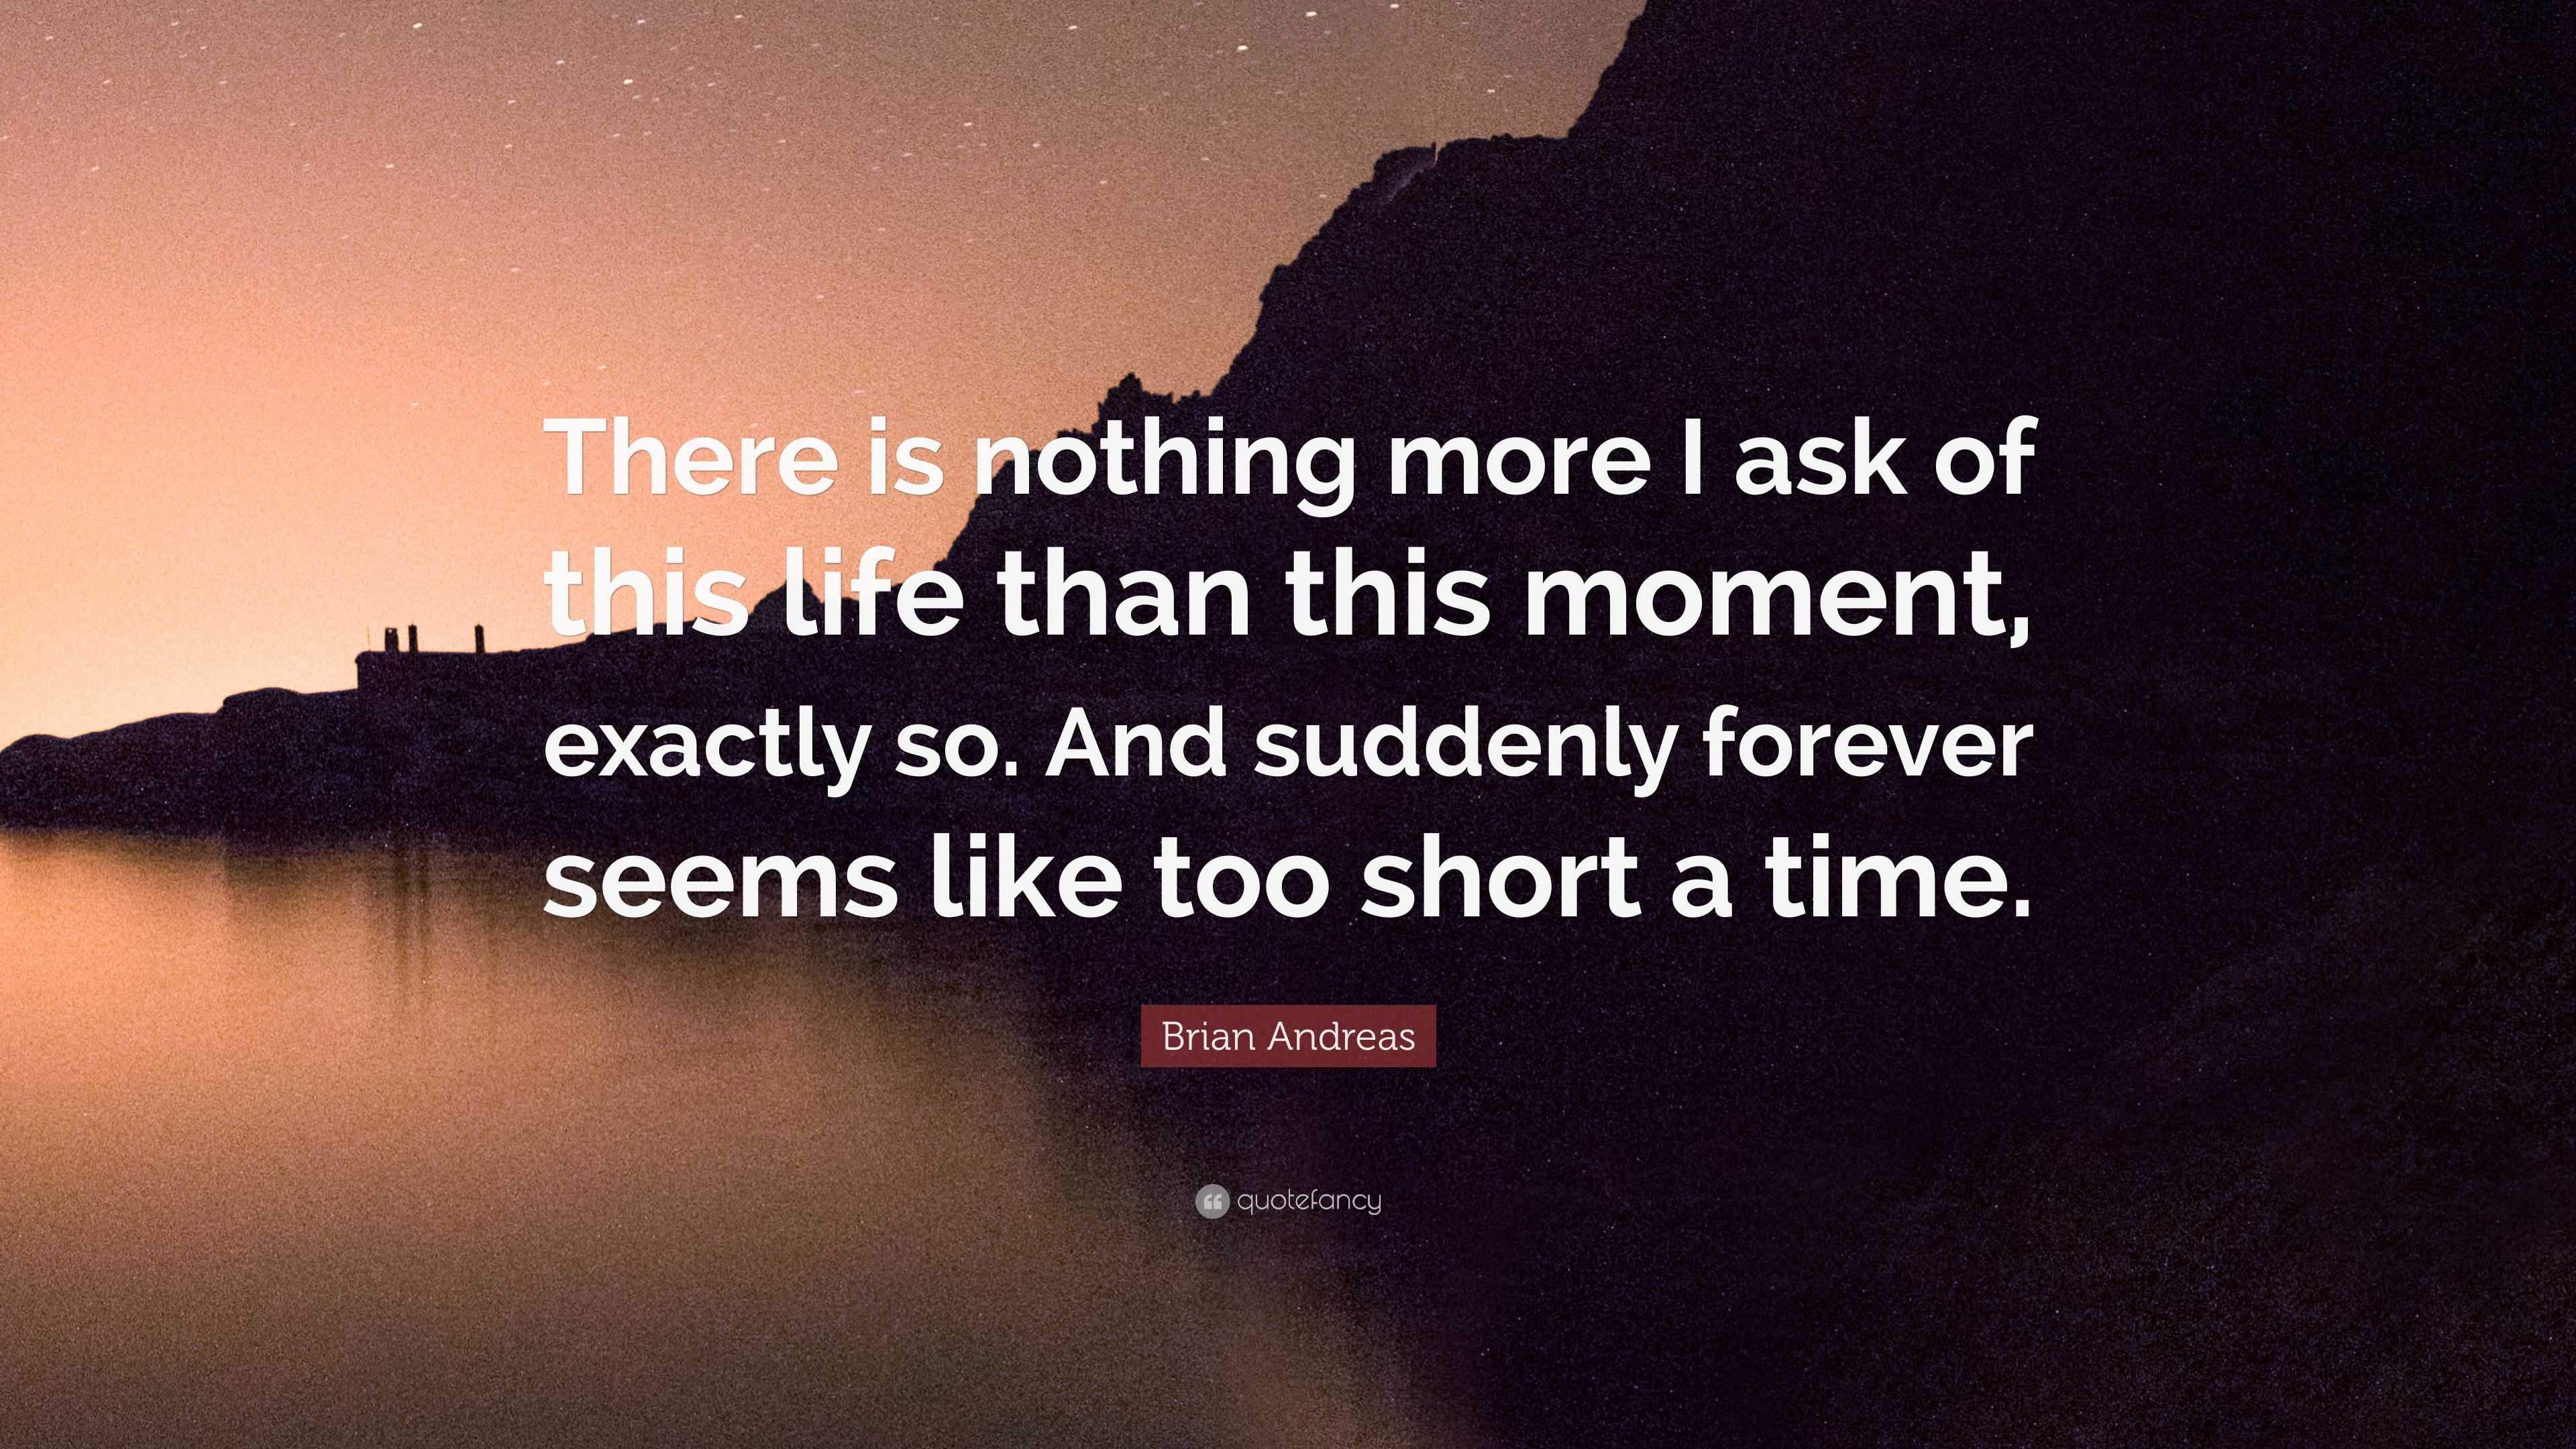 Andreas Quote: “There is nothing I ask of this than this moment, exactly